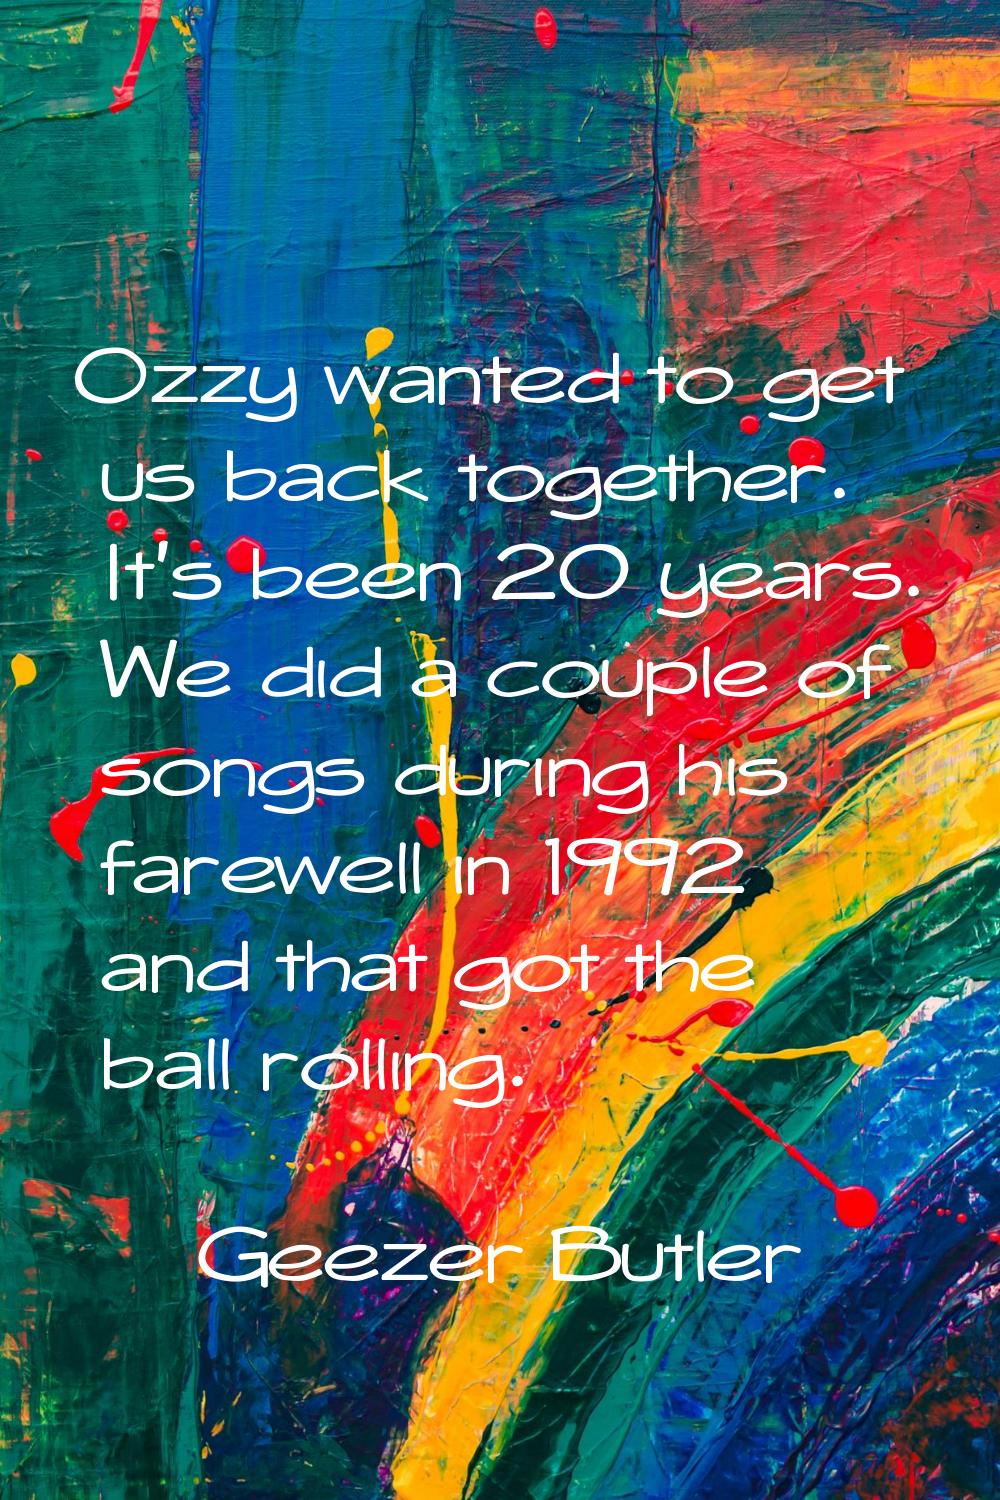 Ozzy wanted to get us back together. It's been 20 years. We did a couple of songs during his farewe